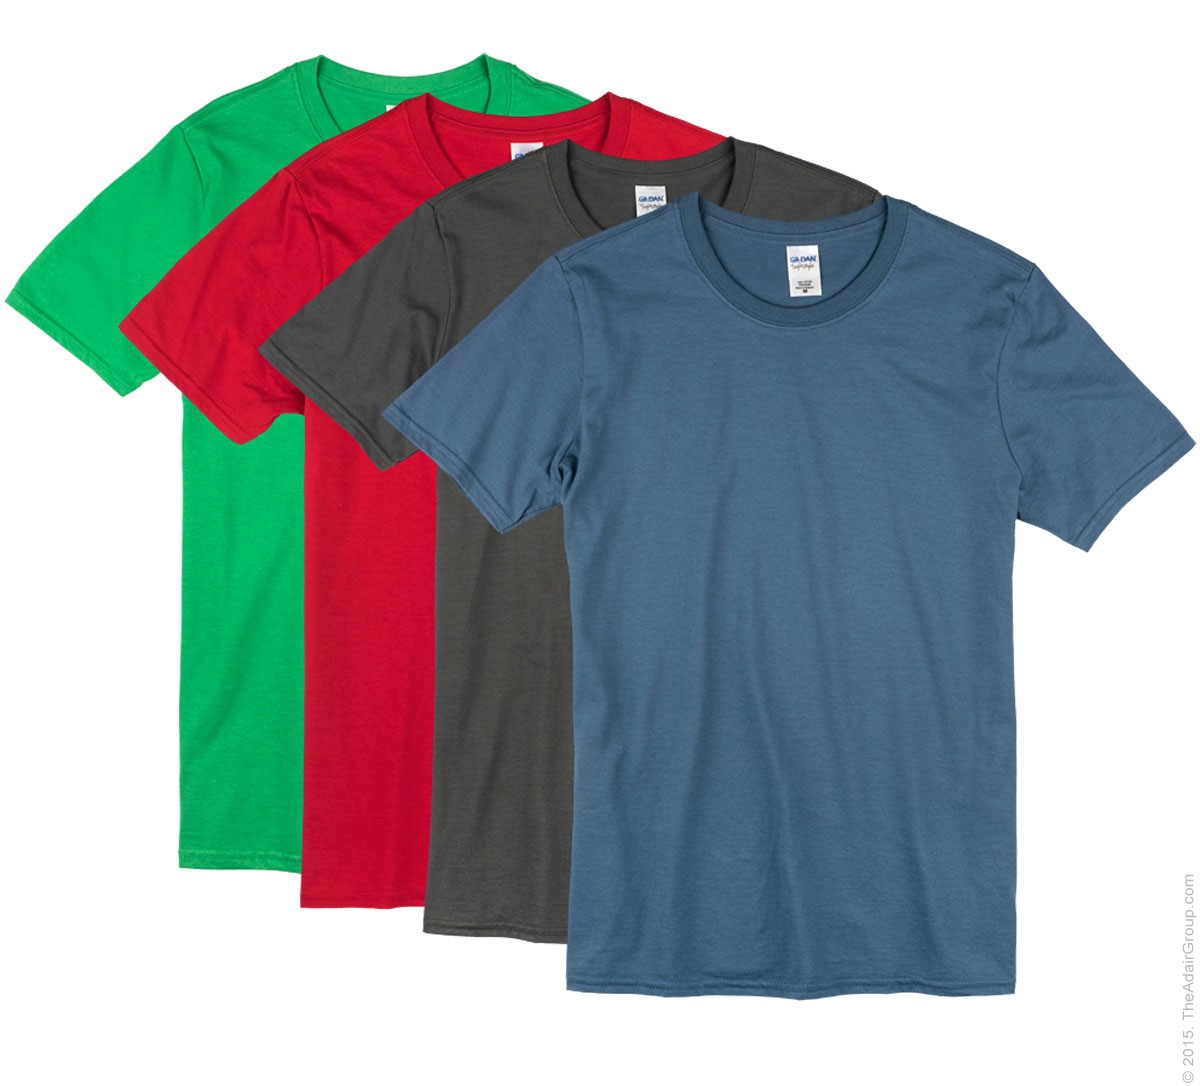 Blank T-Shirts for Adults - Cheapest Prices & Quality Selection